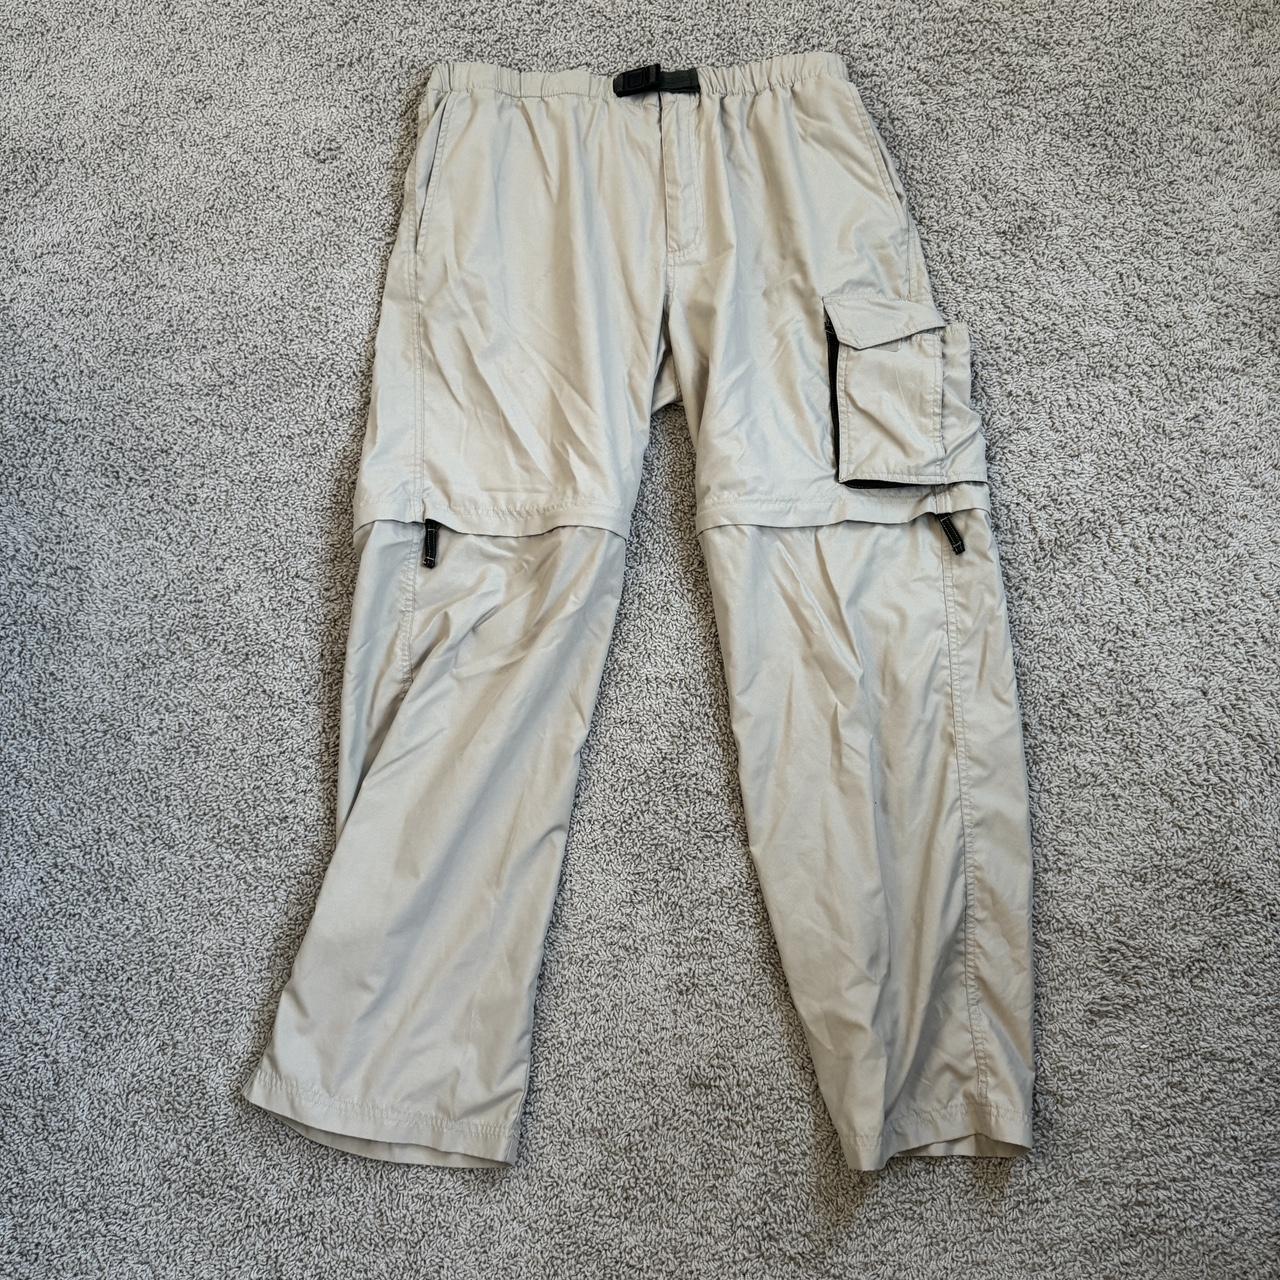 Gap hiking pants/shorts. These are really cool they... - Depop